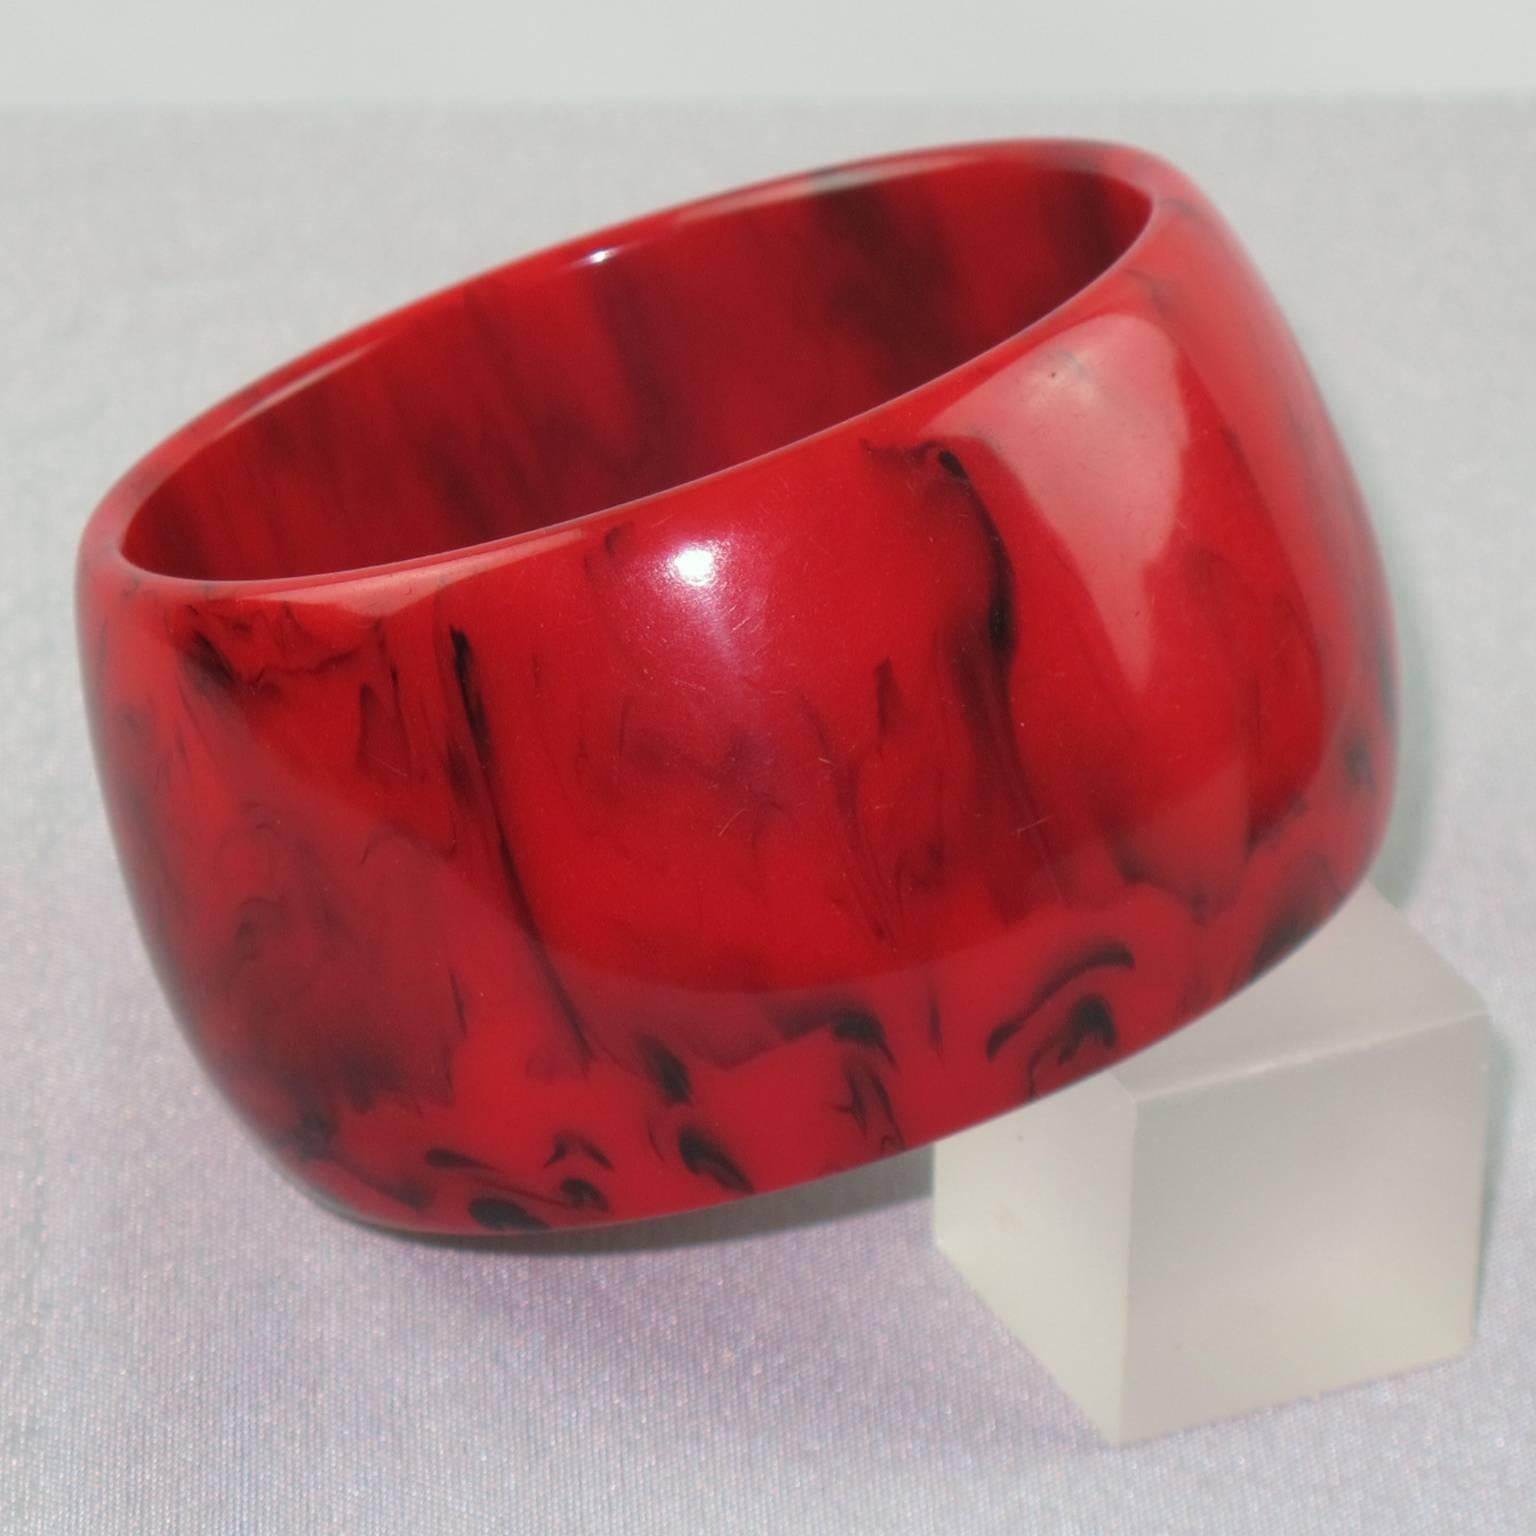 Oversized red and black marble Bakelite bracelet bangle. Extra wide domed shape. Intense red color with black cloudy swirling. Excellent vintage condition.

Measurements: Inside across = 2.57 in. (6.5 cm) - outside across = 3.19 in. (8 cm) - width =